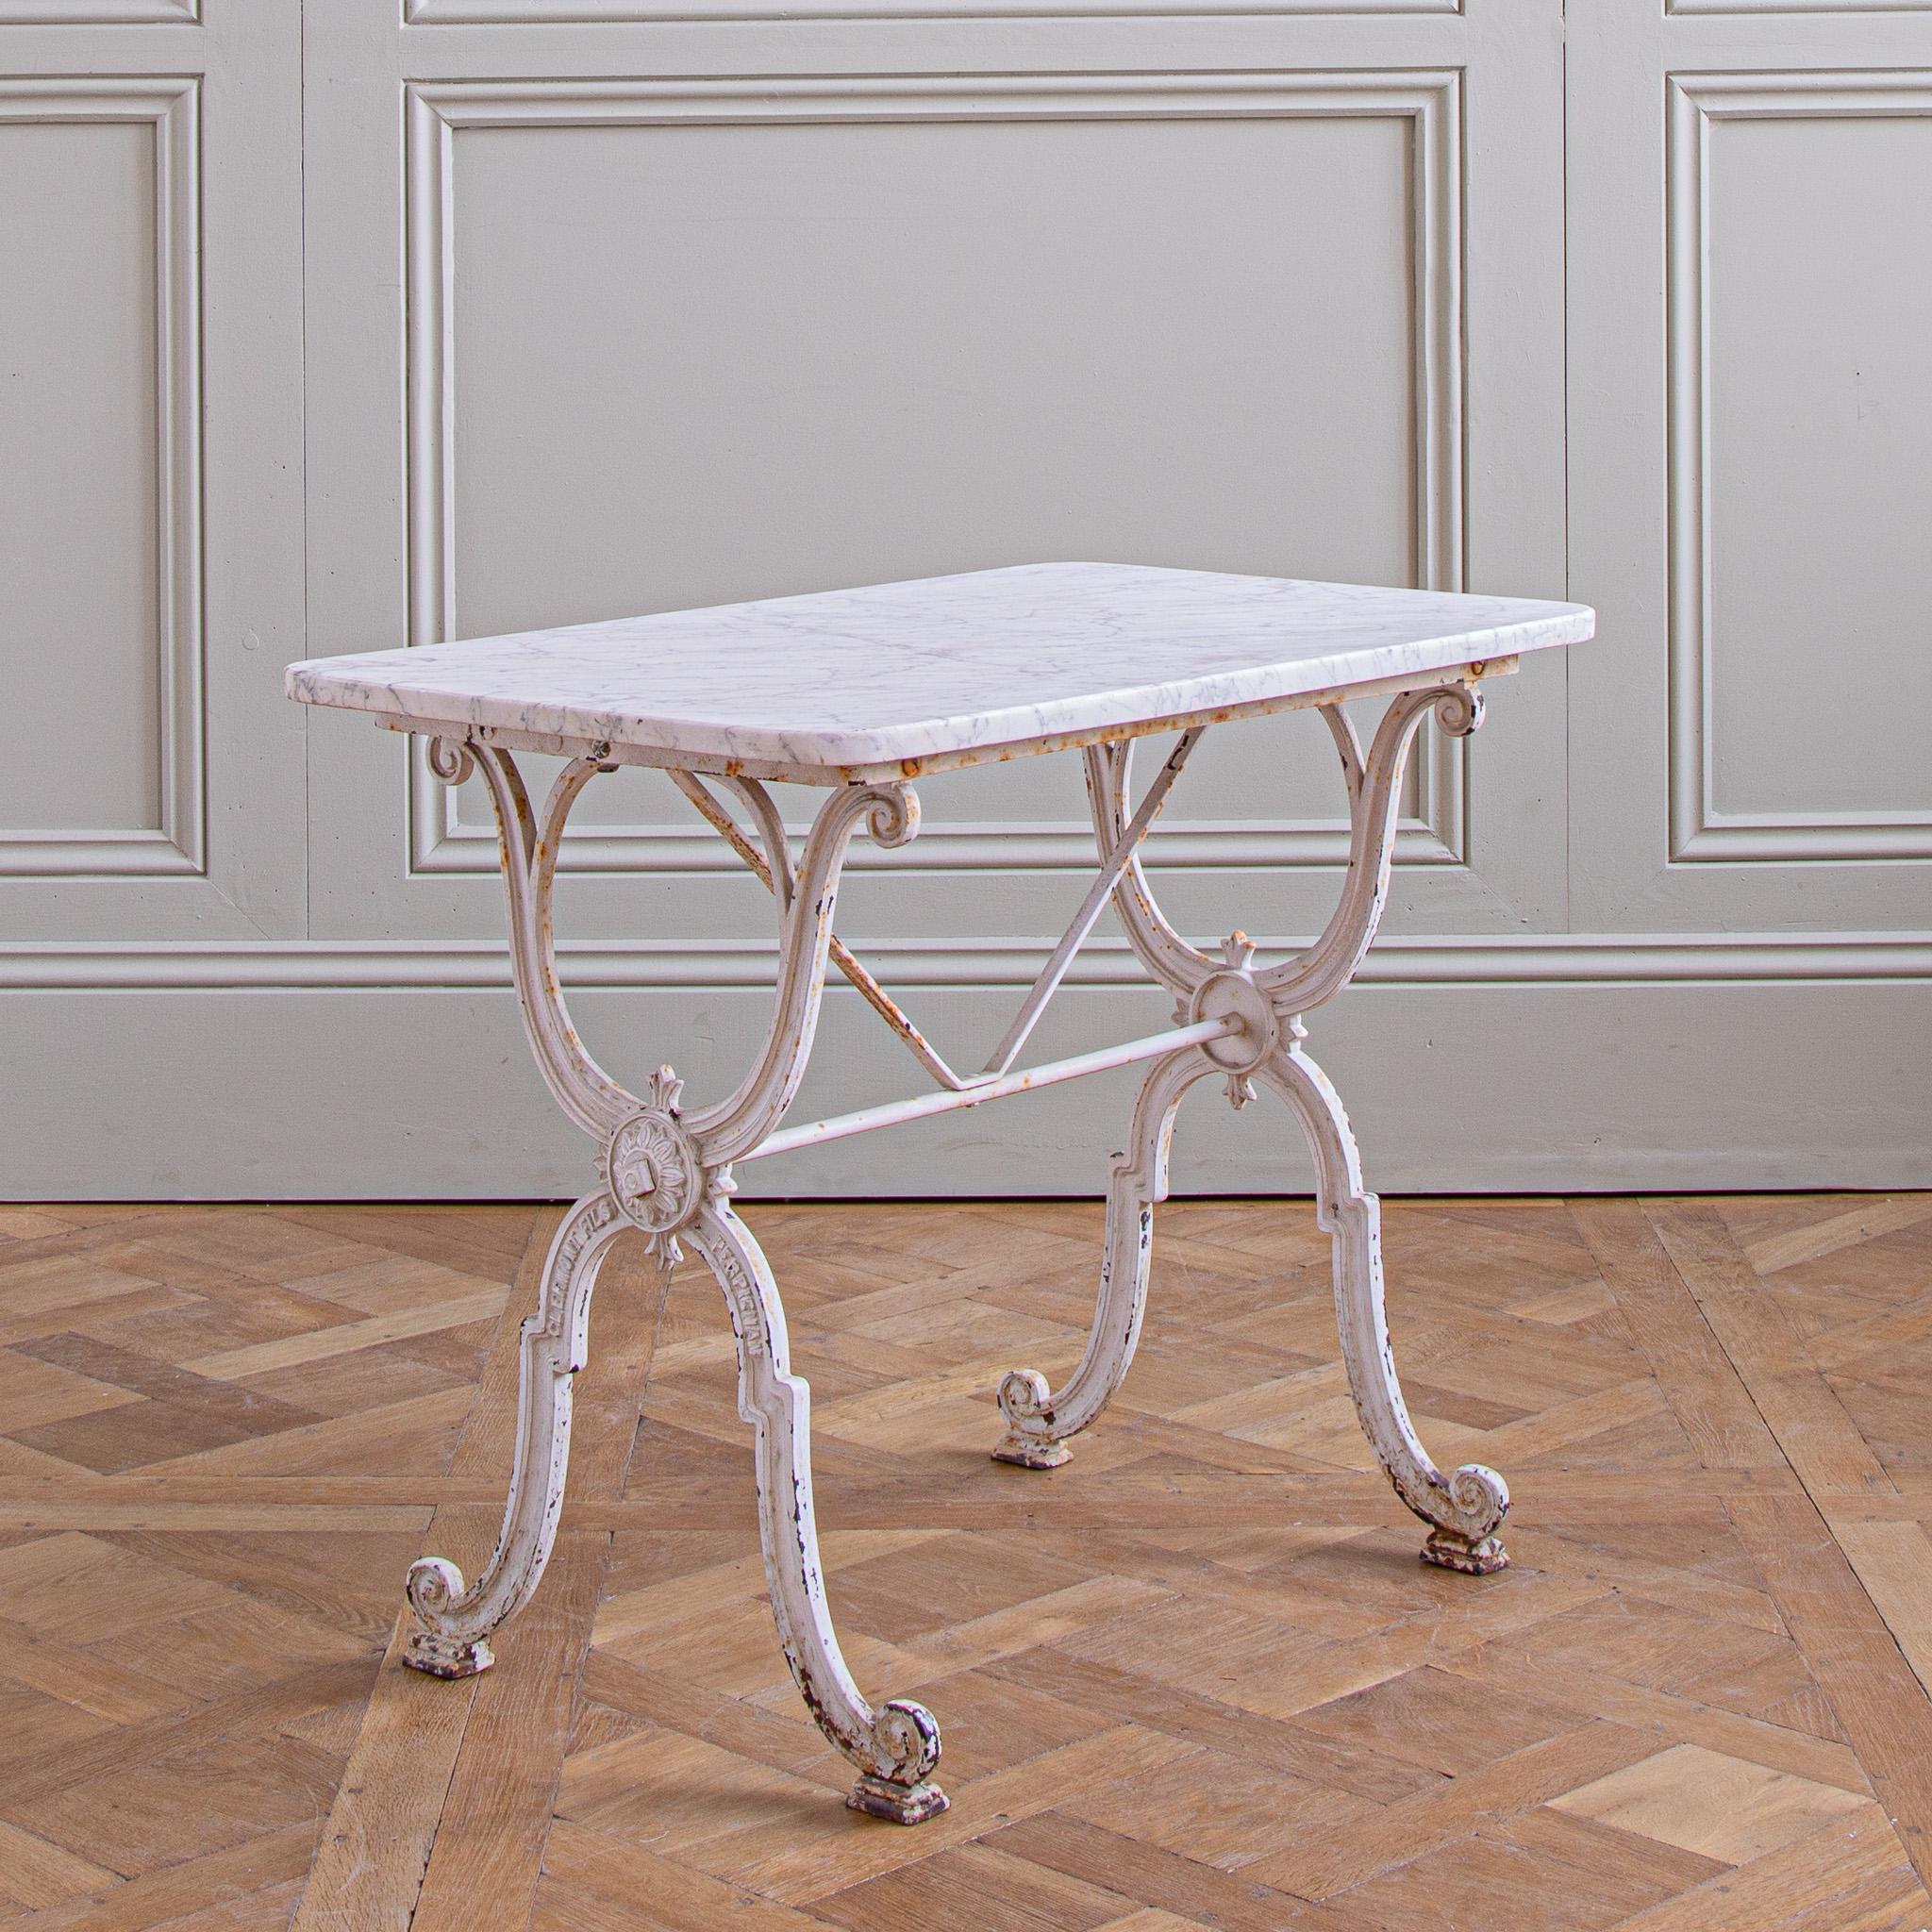 A French bistro table which can be used indoors or outs - as a garden table. The base is in a classical, French, early 1900's style and is made in cast iron by Clermont Fils of Perpignan. The base has its original white paintwork which has some